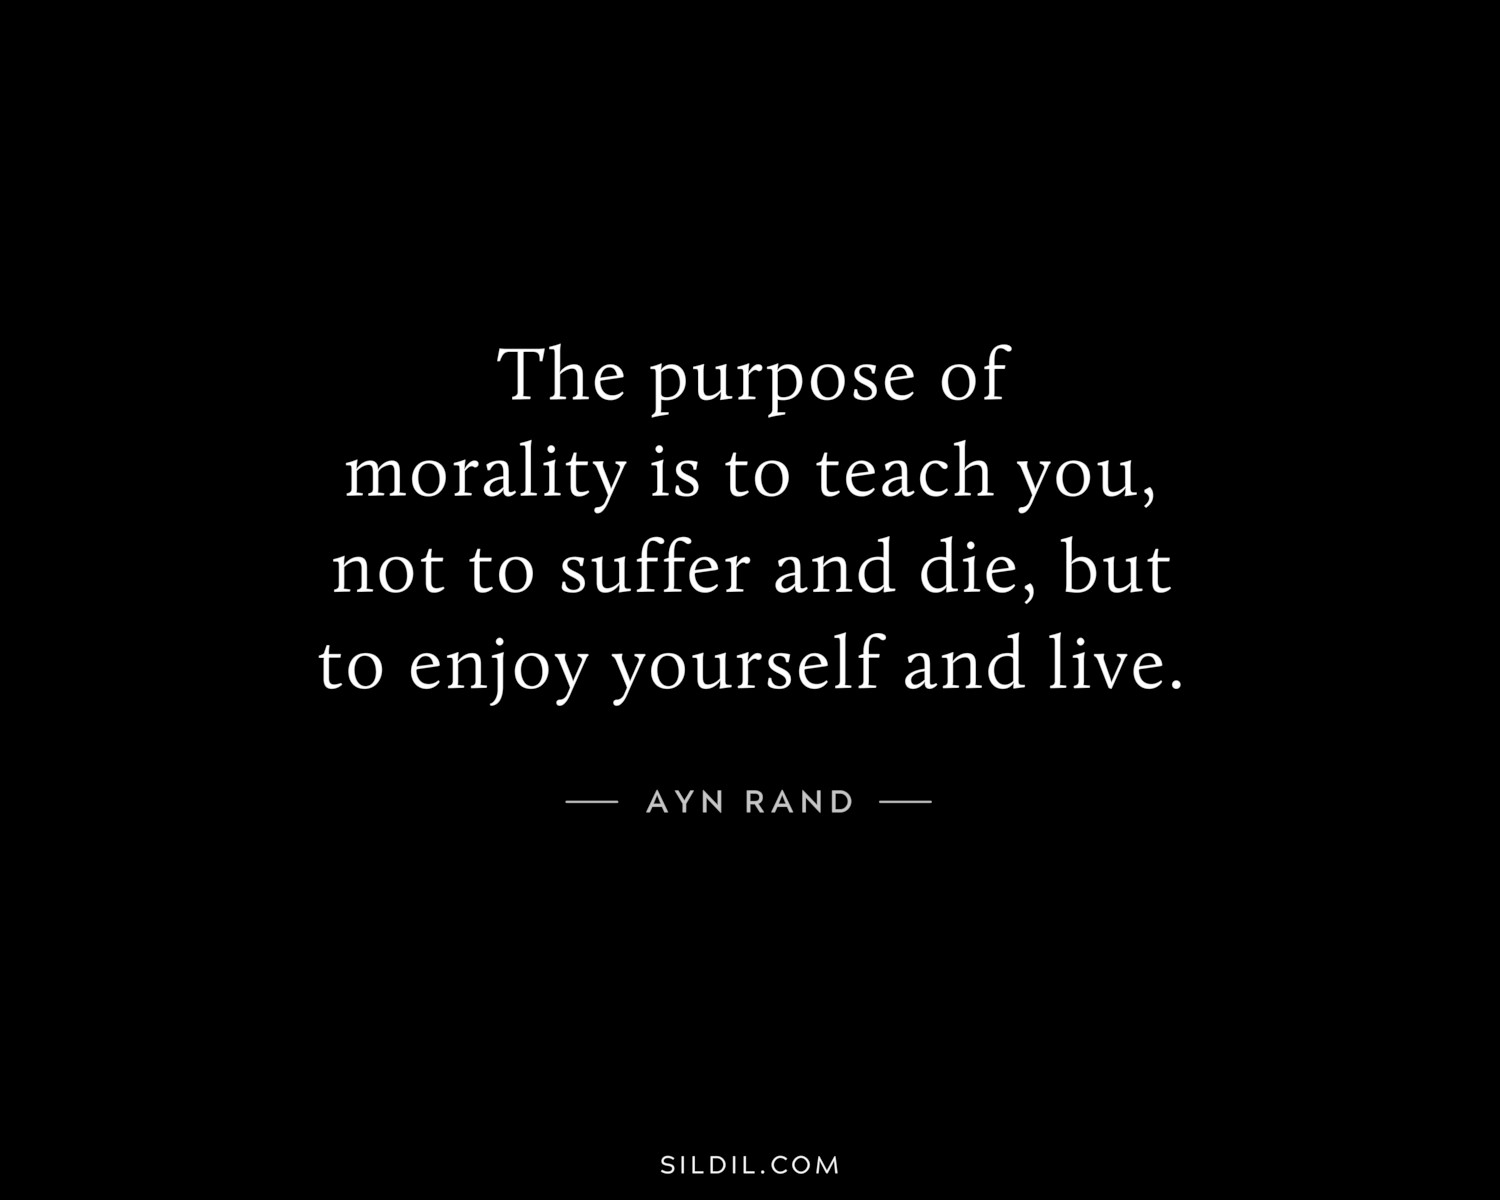 The purpose of morality is to teach you, not to suffer and die, but to enjoy yourself and live.